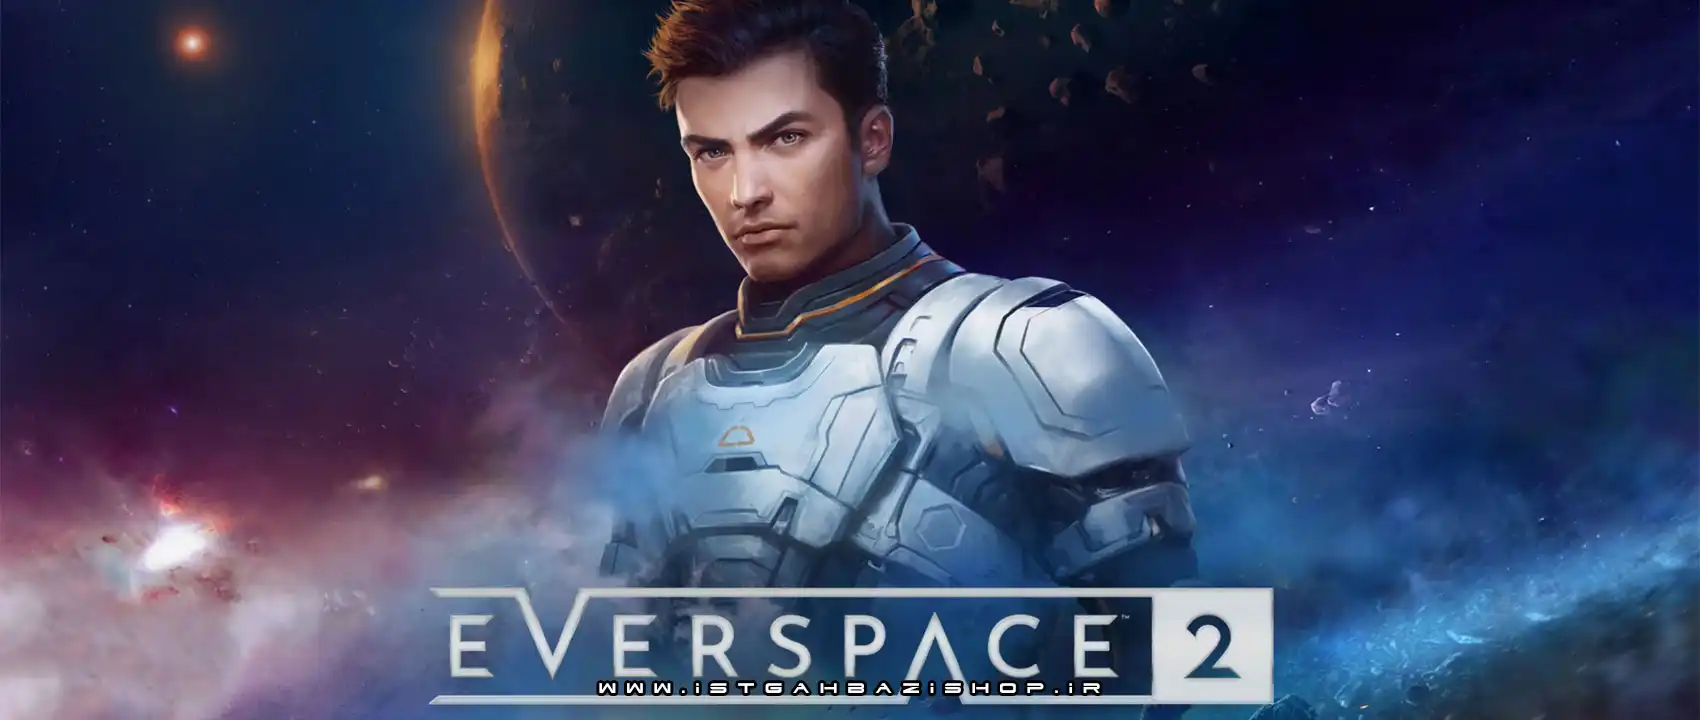 EVERSPACE 2 Ps5